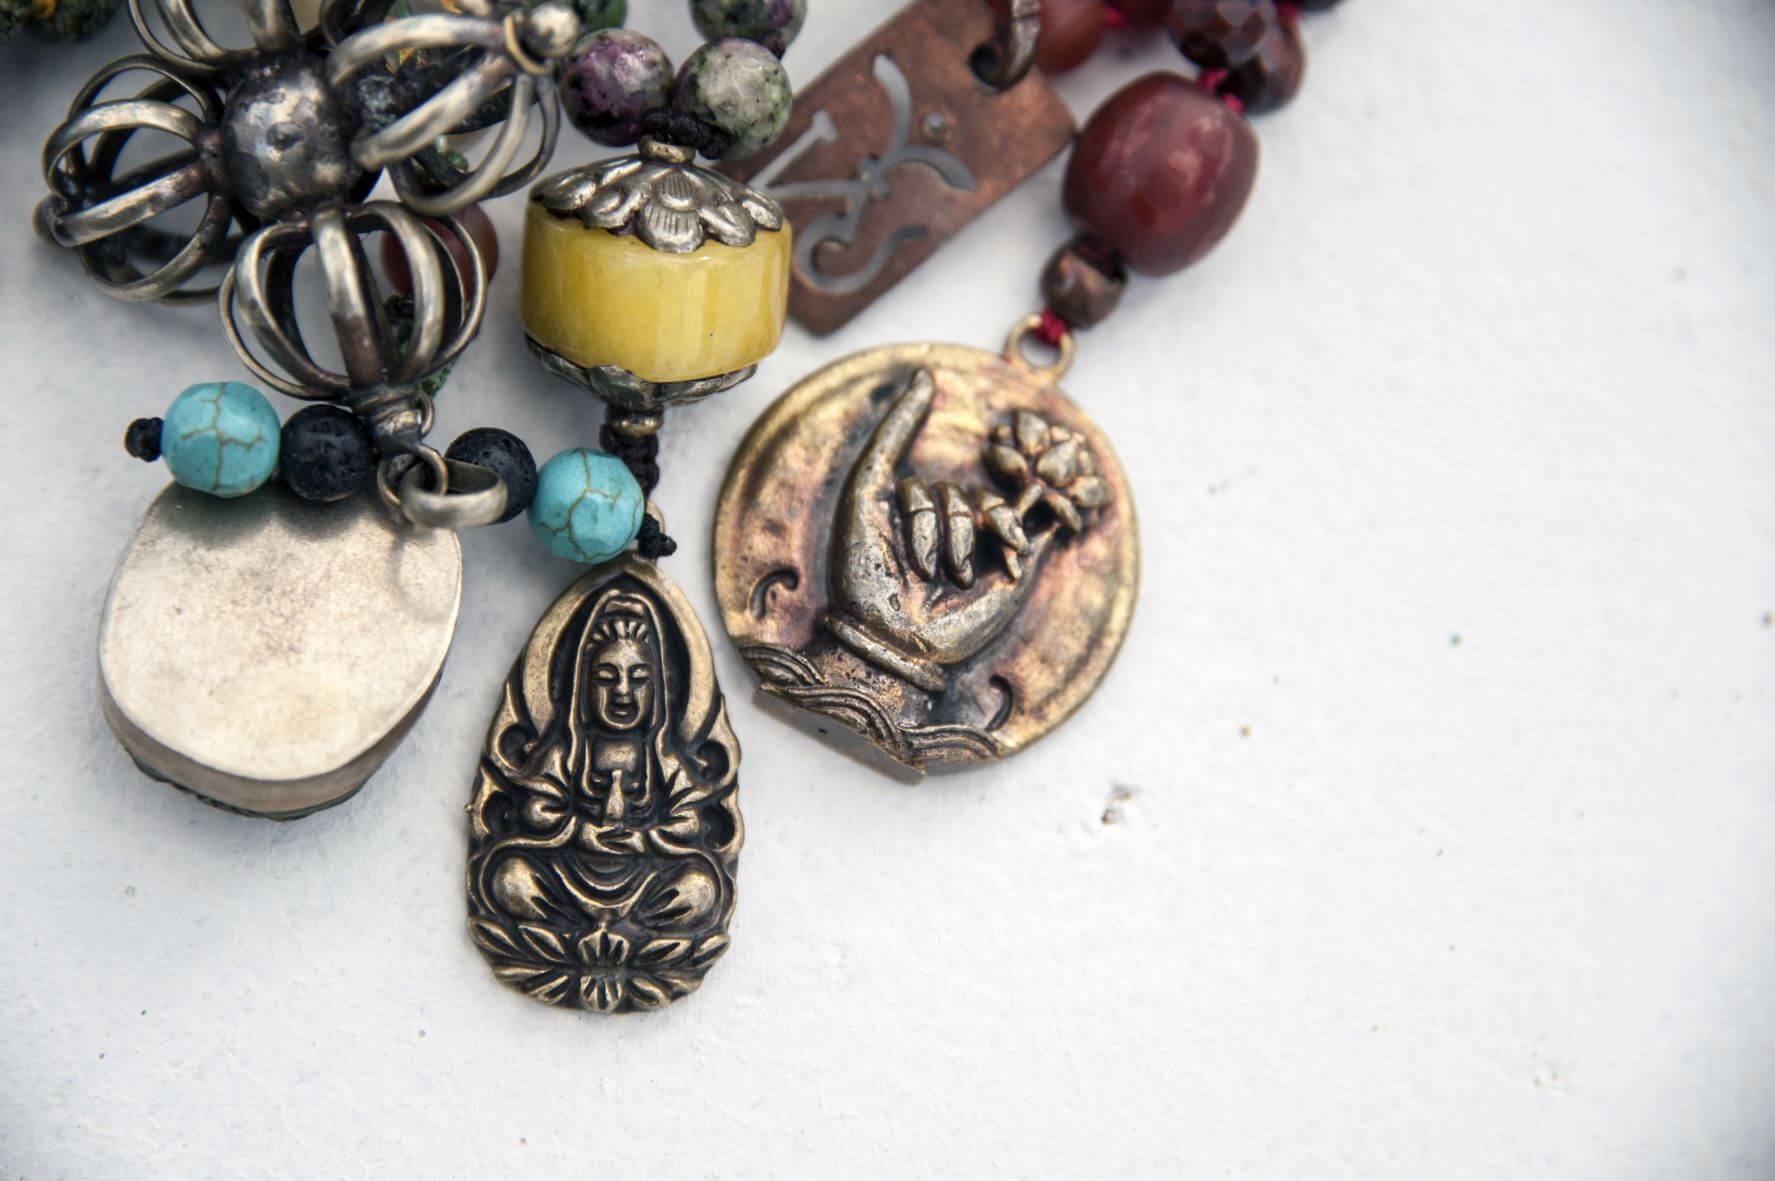 Sacred mala pendants of a buddha and a hand in mudras with a lotus